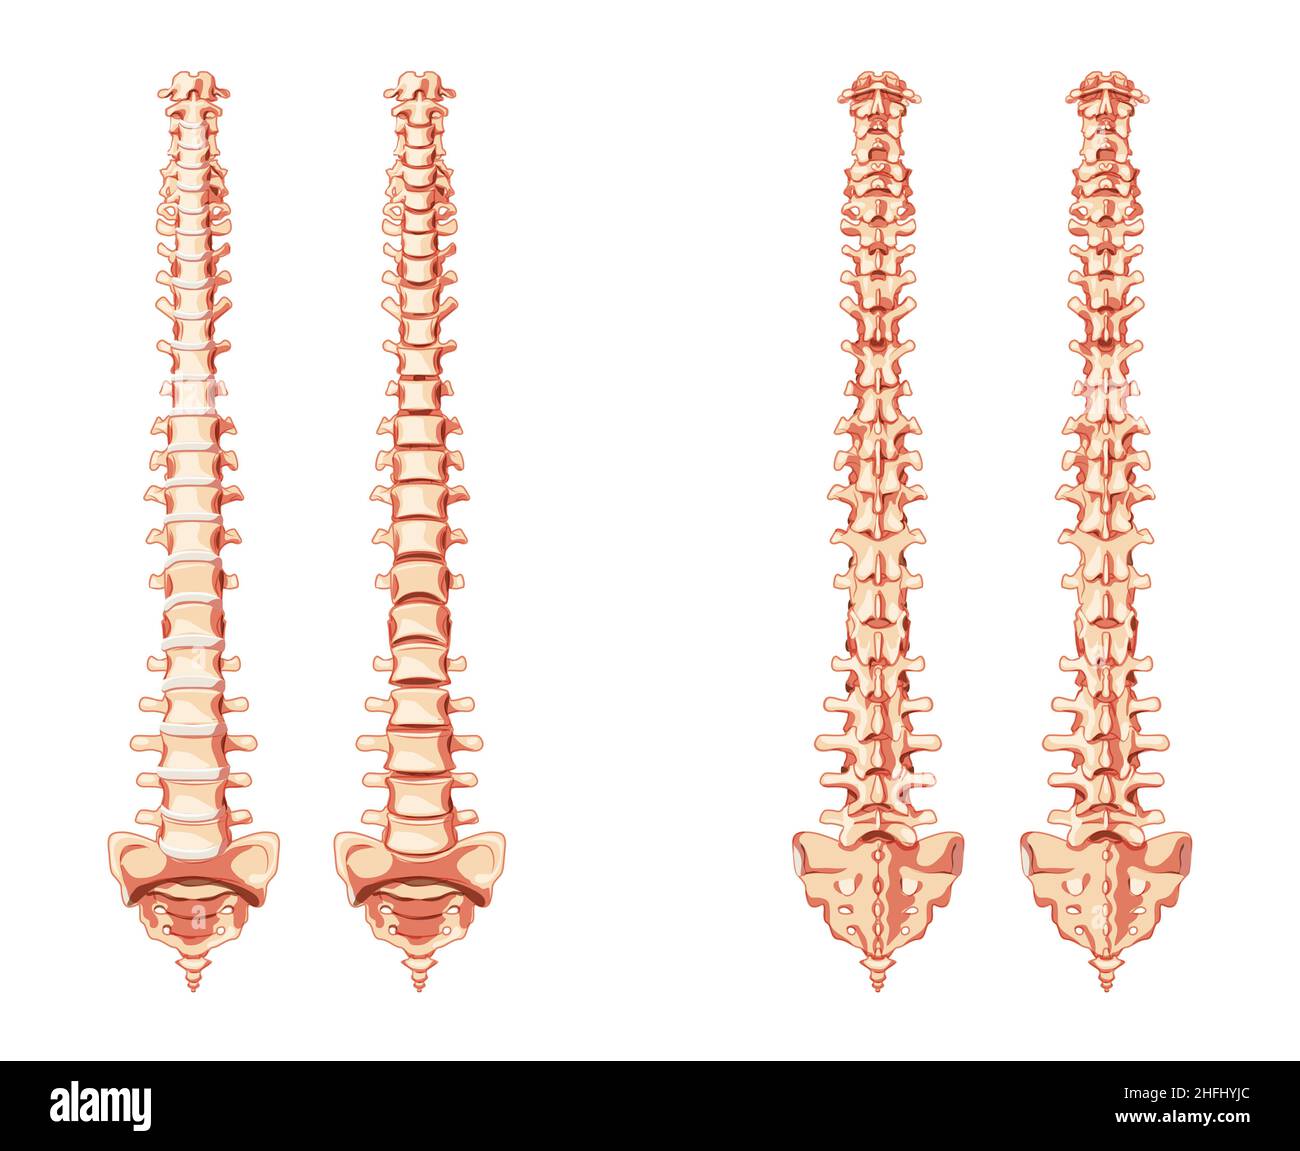 The human vertebral column spine anatomy front, back with and without Intervertebral disc. Vector flat realistic concept illustration in natural colors, spine isolated on white background. Stock Vector